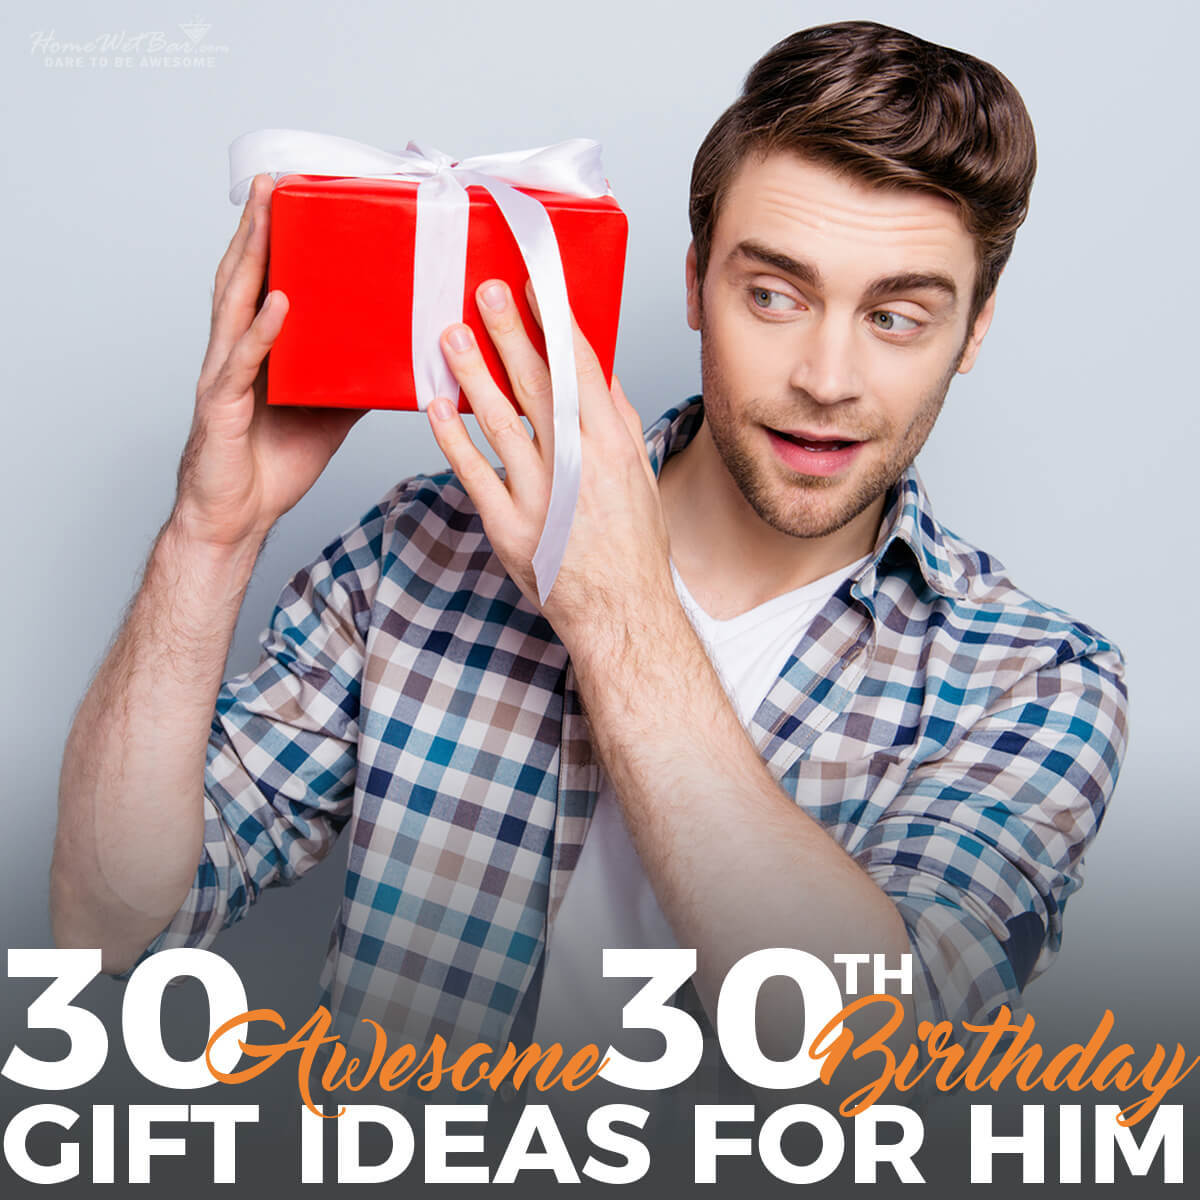 30 Birthday Gift Ideas For Him
 30 Awesome 30th Birthday Gift Ideas for Him